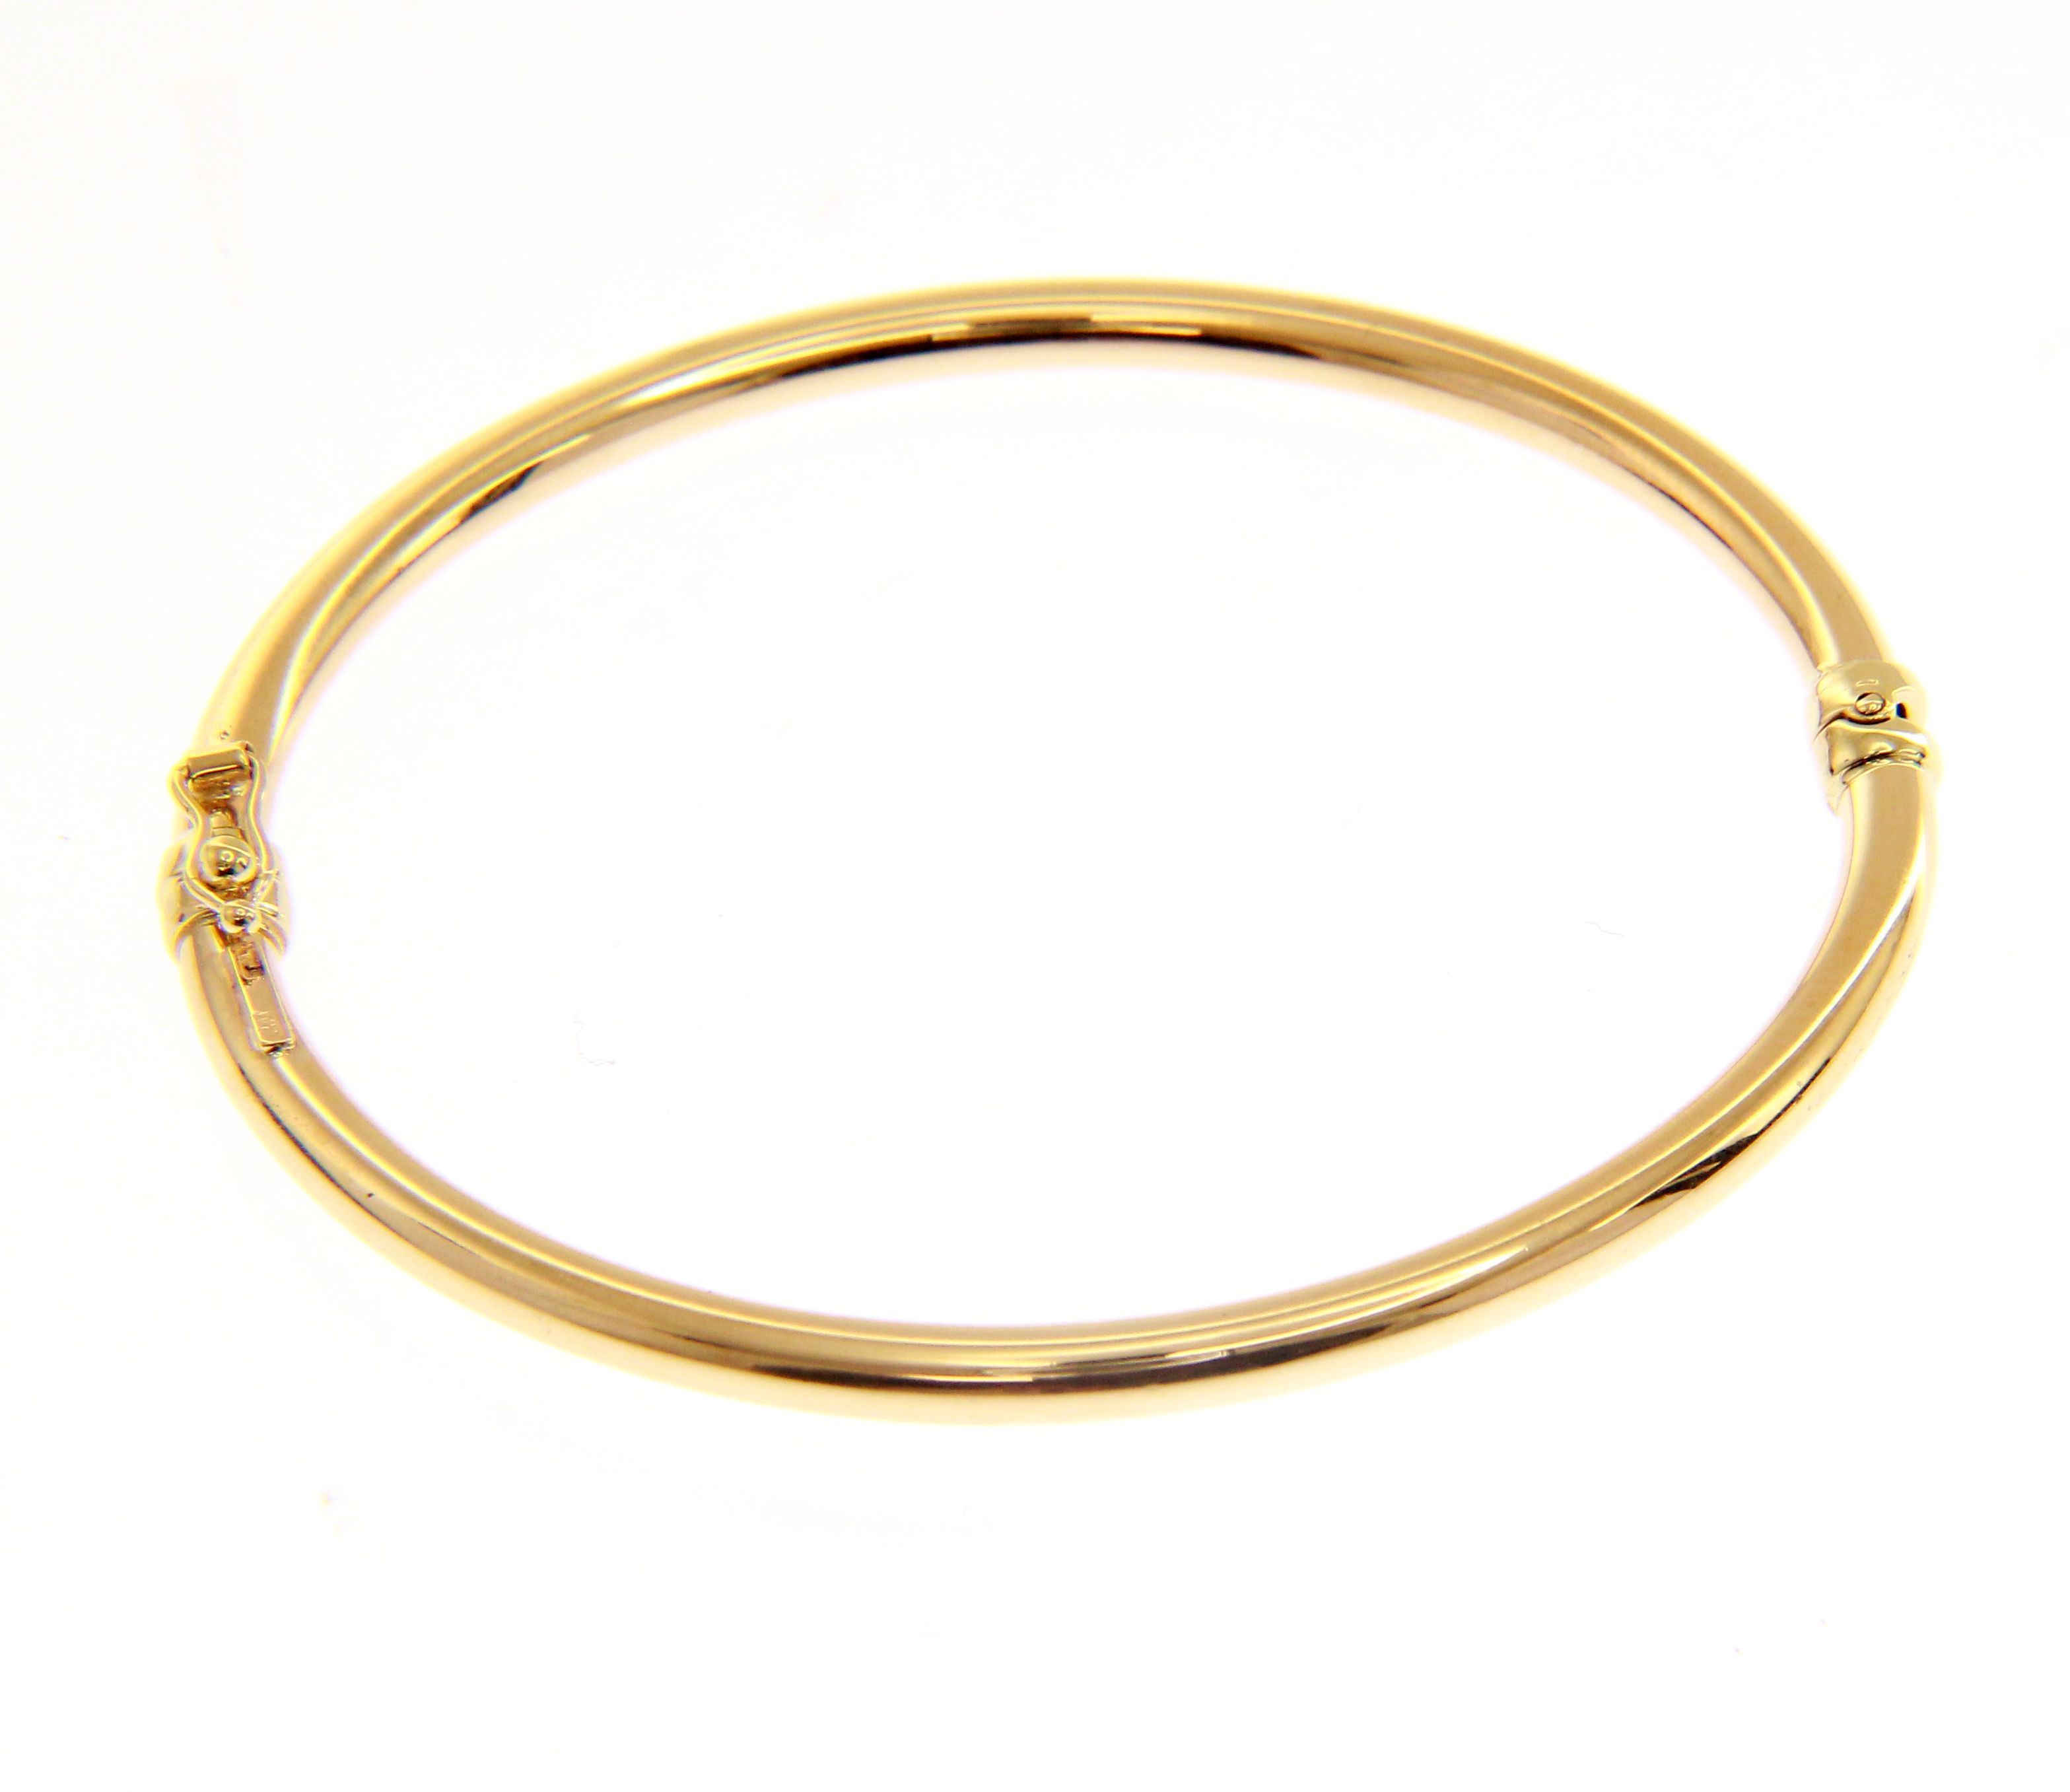 Golden oval bracelet with clasp k14  (code S205141)